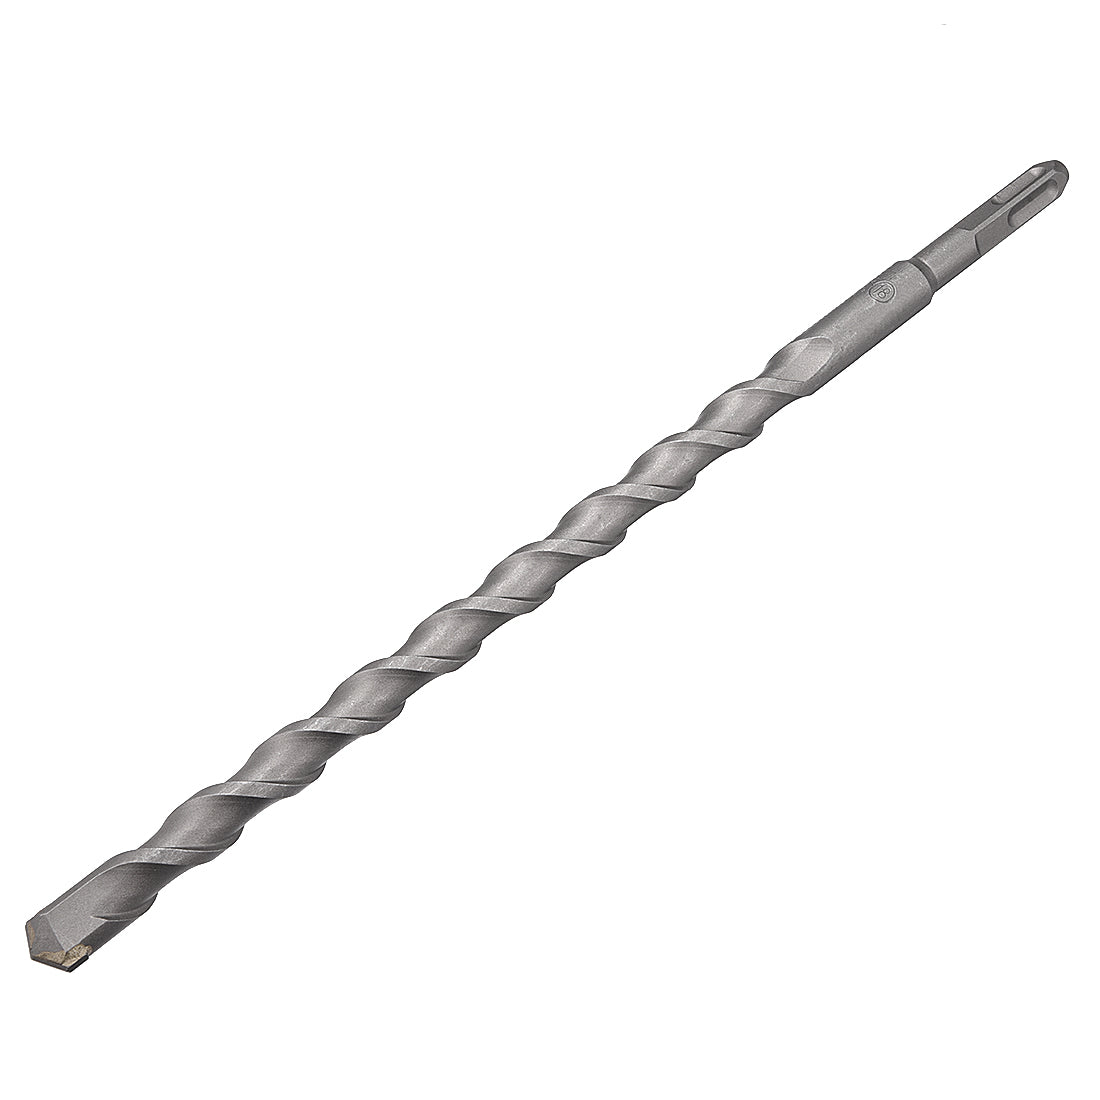 Uxcell Uxcell Masonry Drill Bit 22mmx200mm 9.5mm Square Shank for Impact Drill